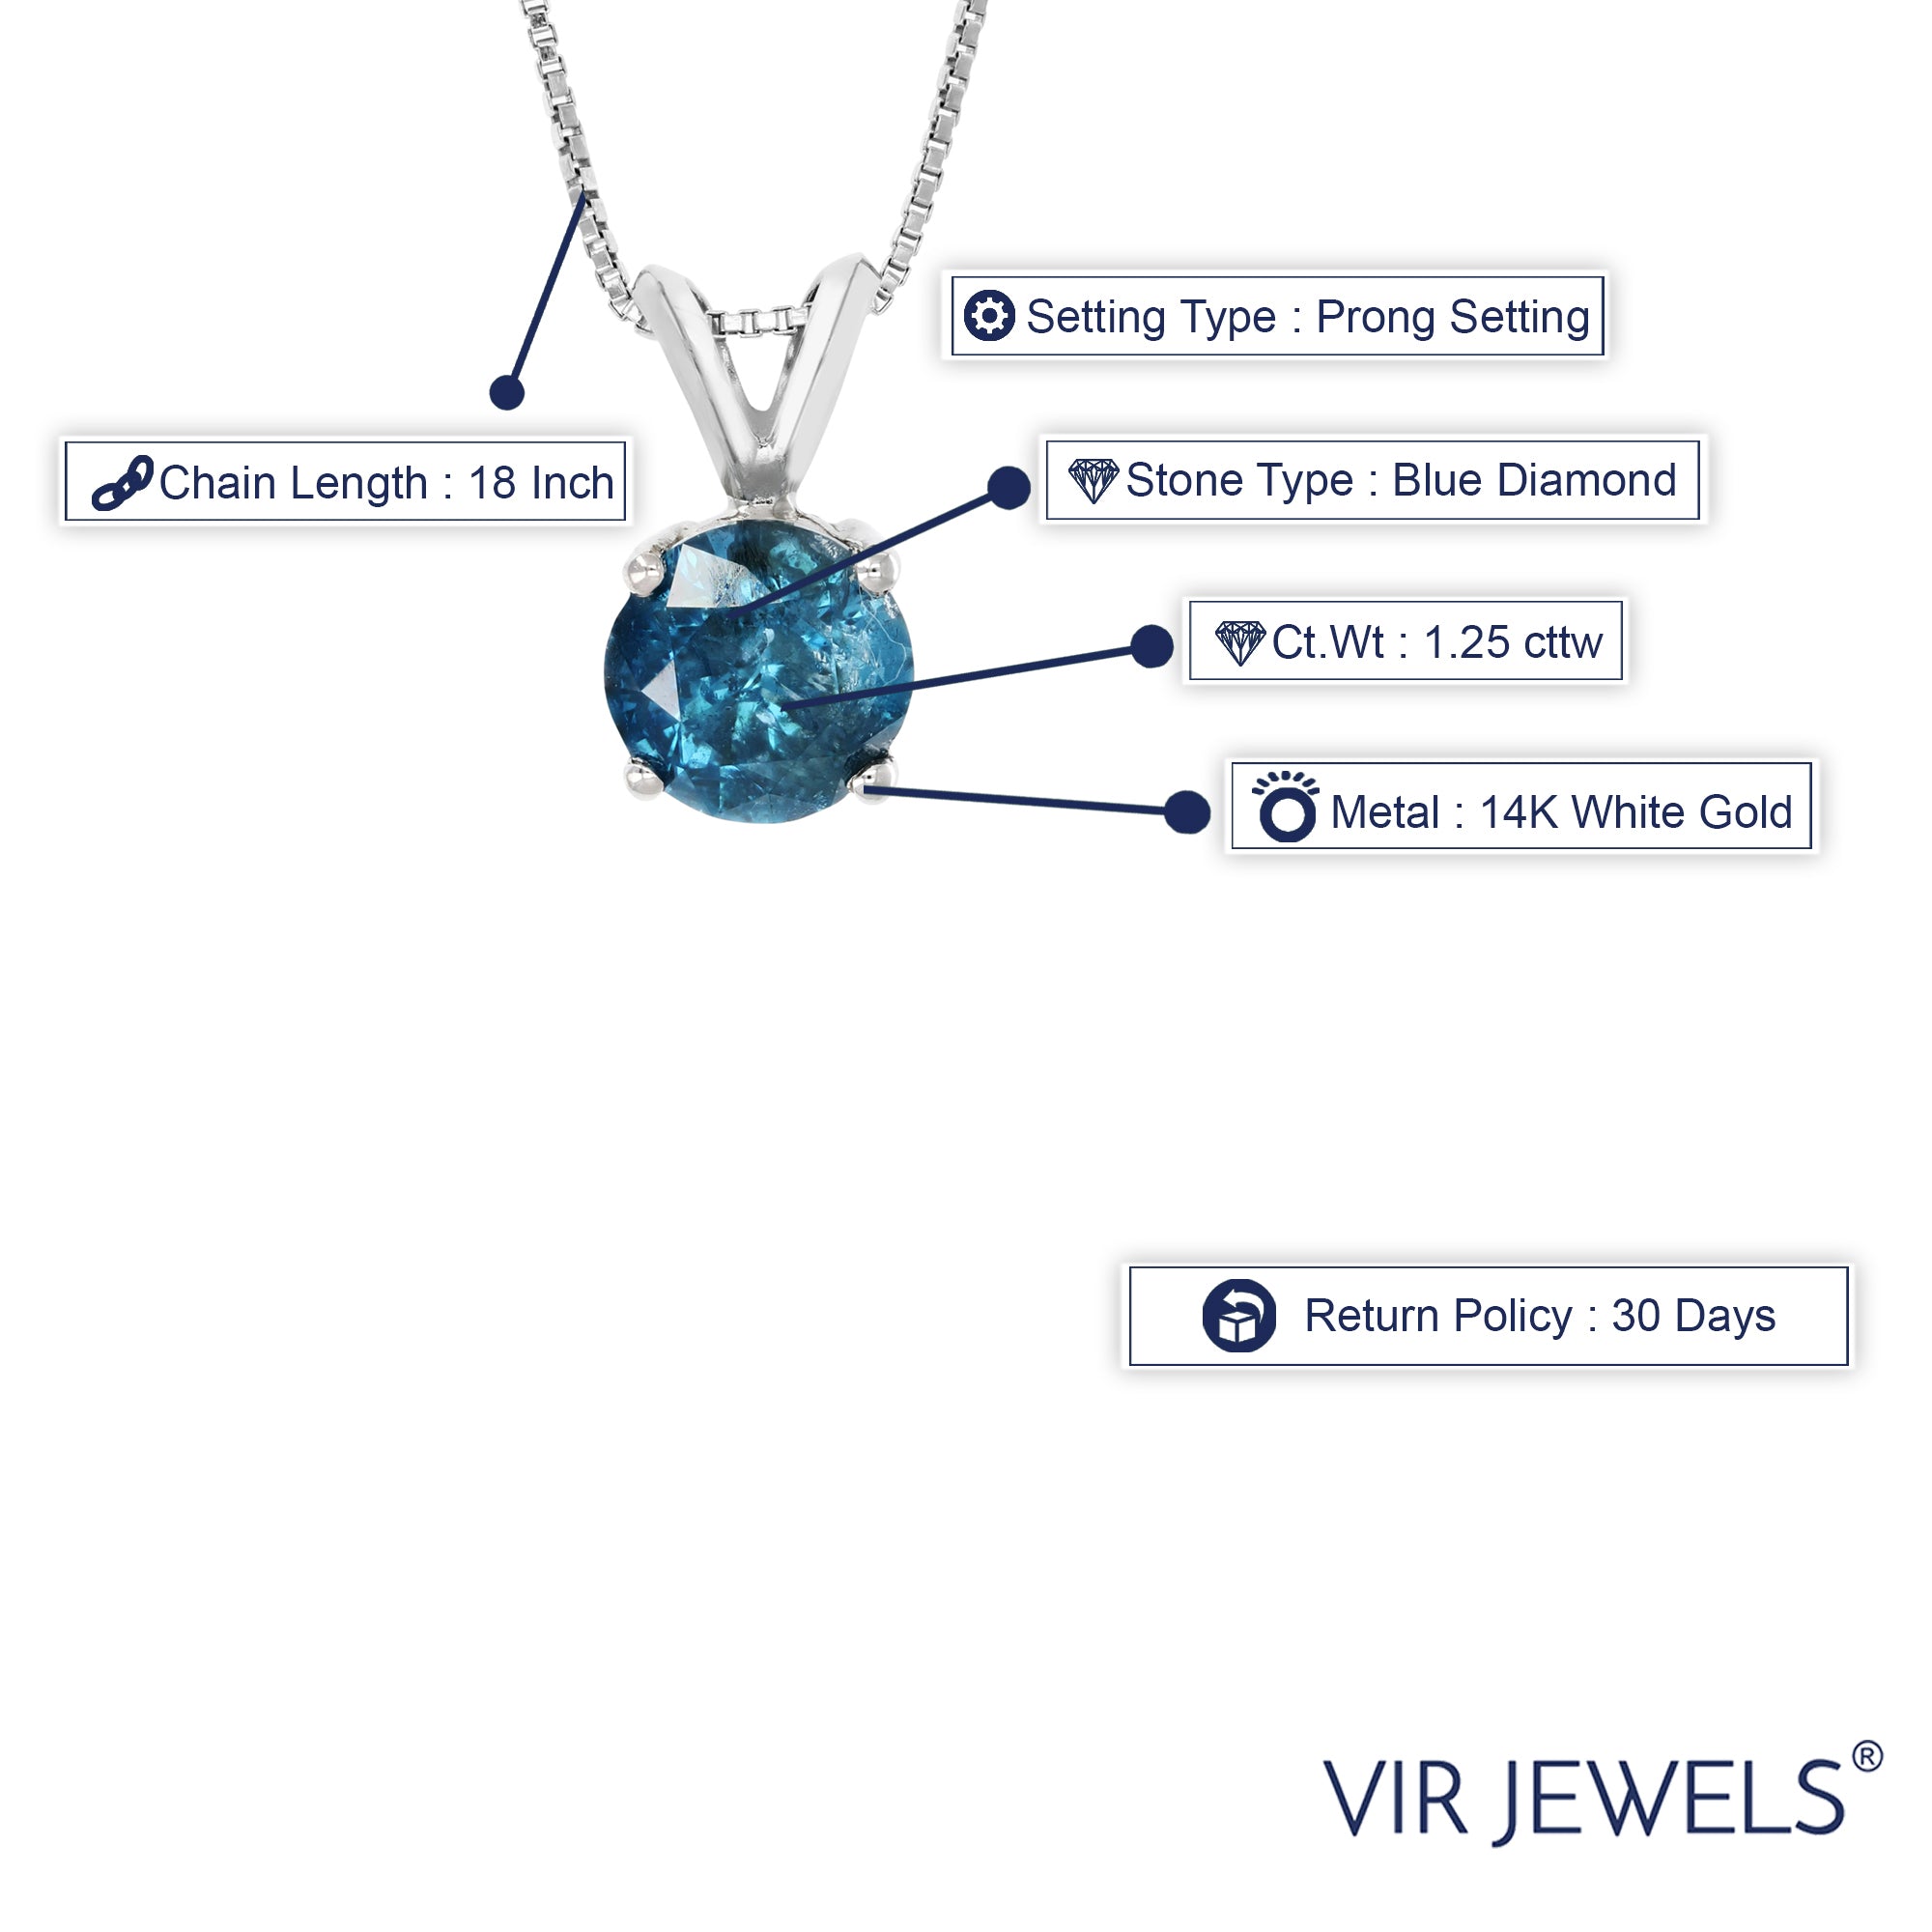 1.25 cttw Diamond Pendant, Blue Diamond Solitaire Pendant Necklace for Women in 14K White Gold with 18 Inch Chain, Prong Setting